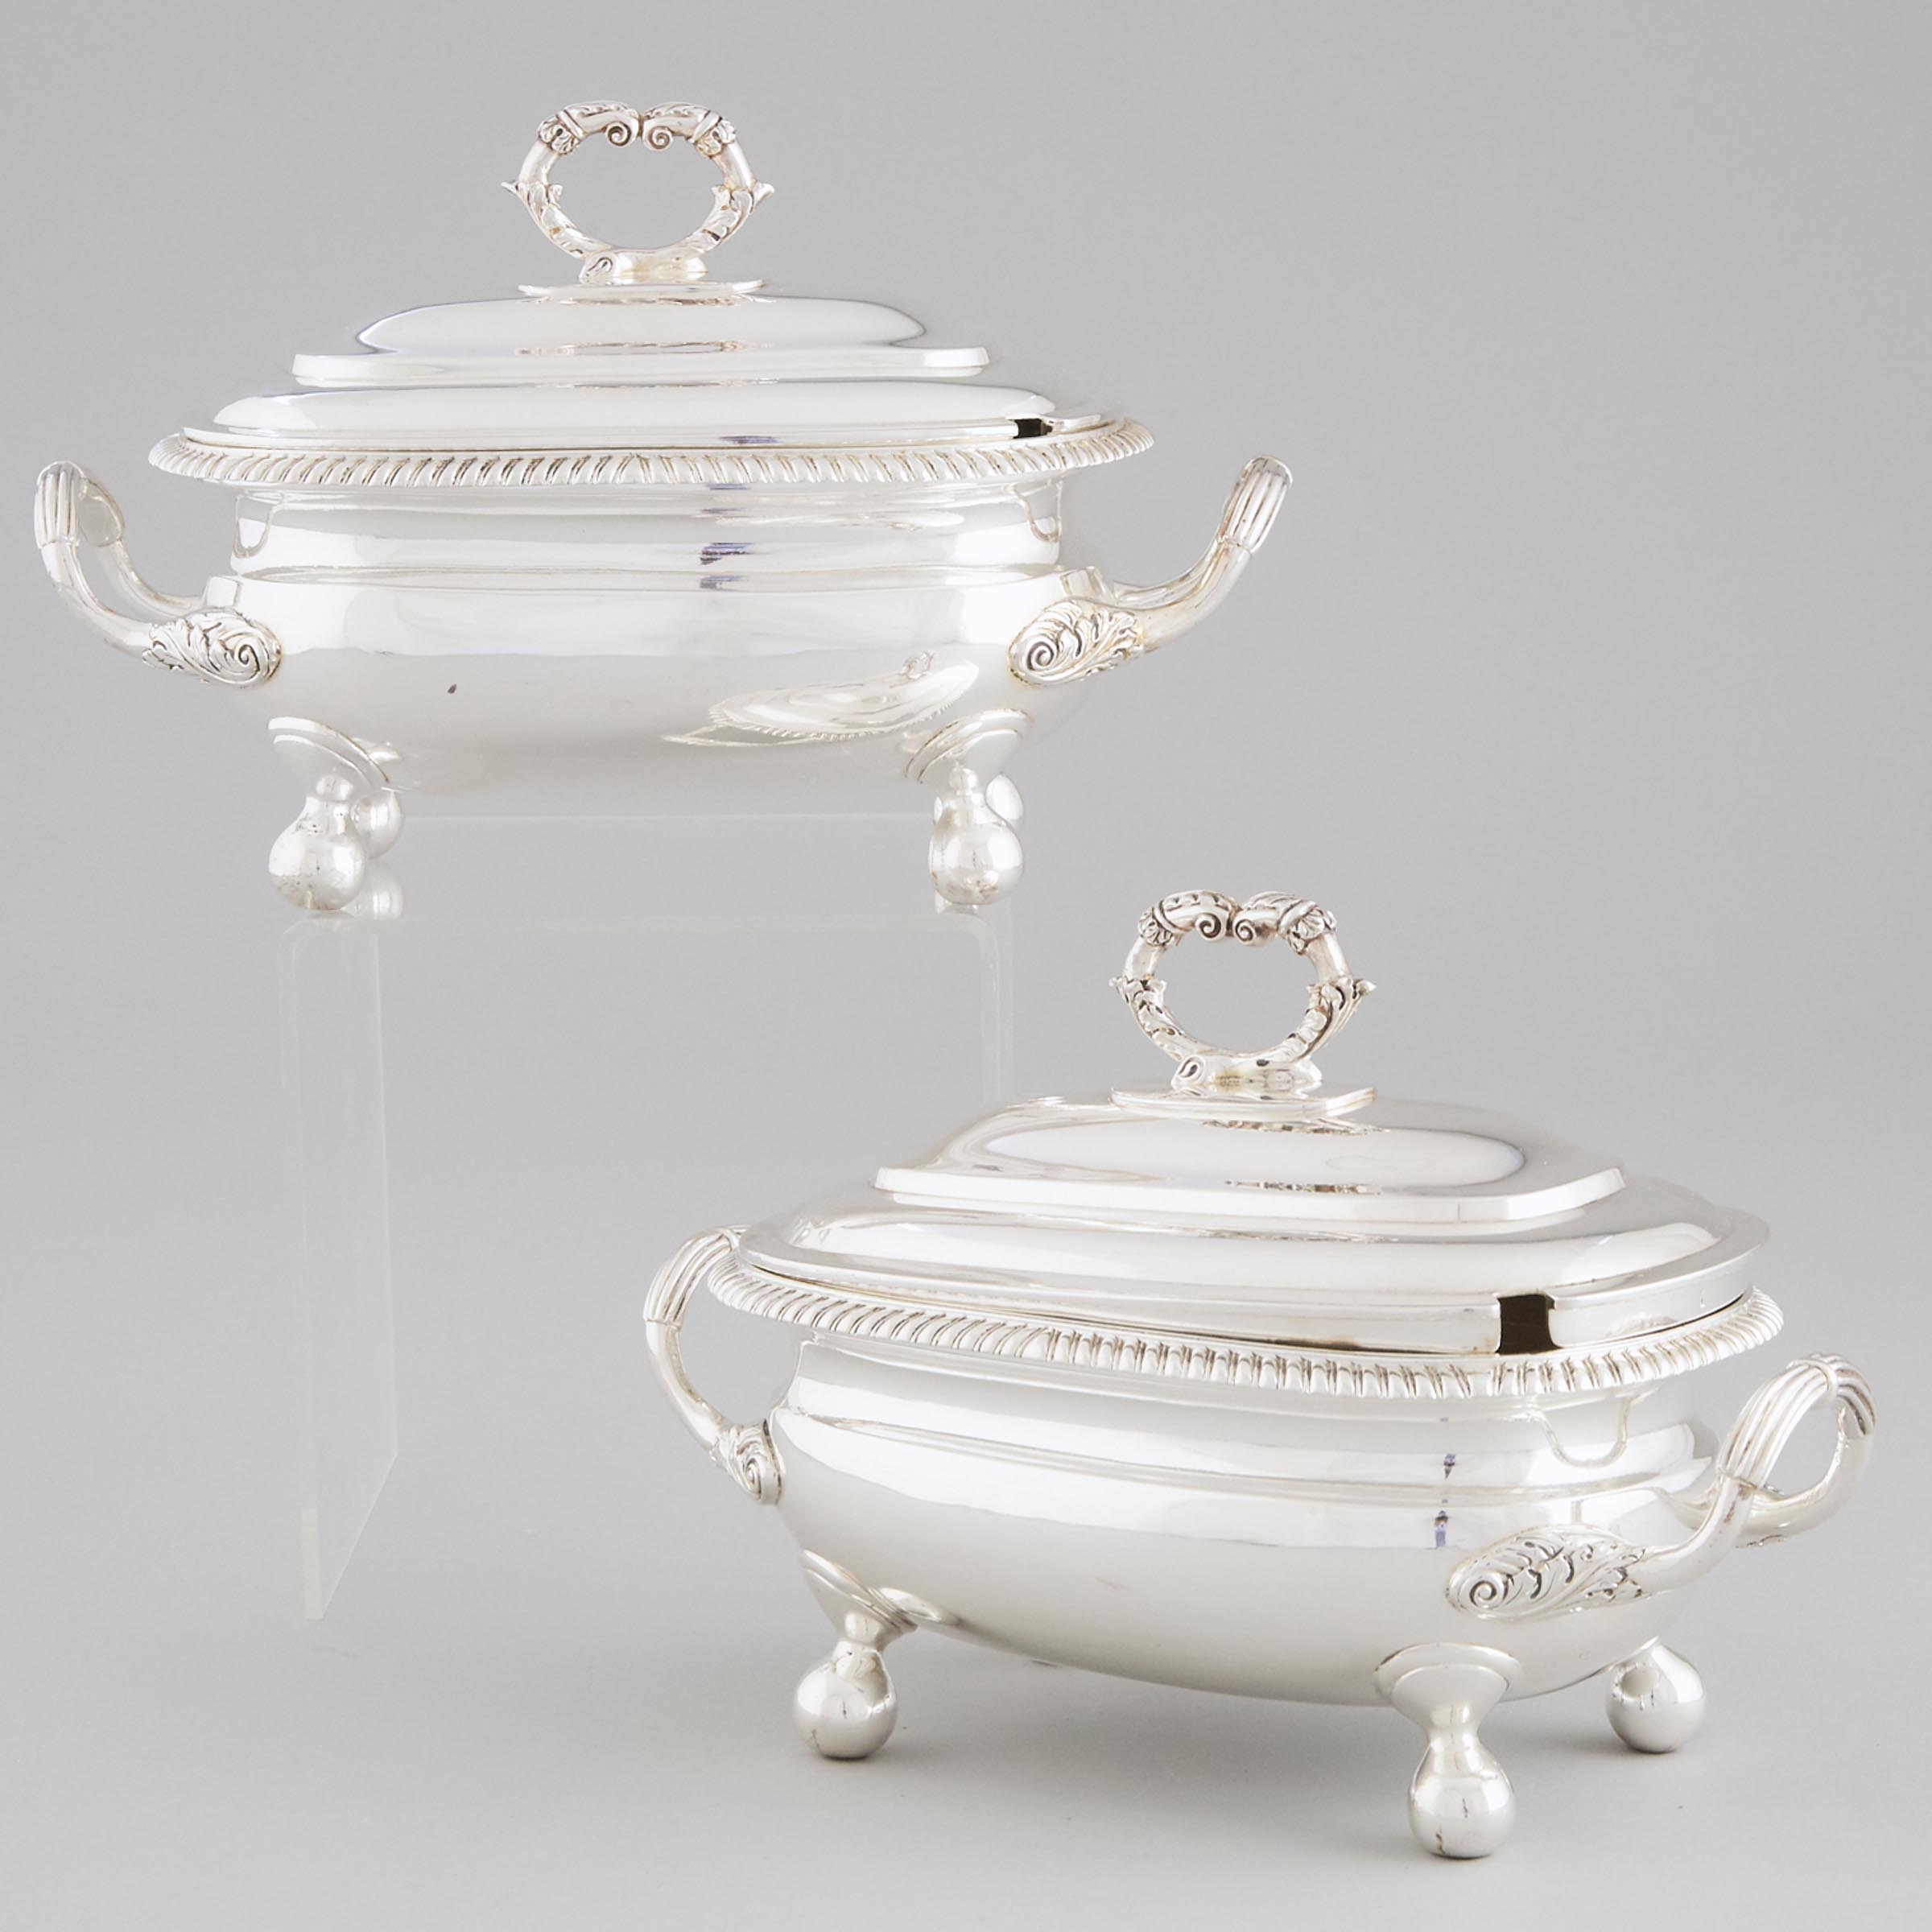 Pair of George III Silver  Oval Covered Sauce Tureens, Thomas Robins, London, 1810